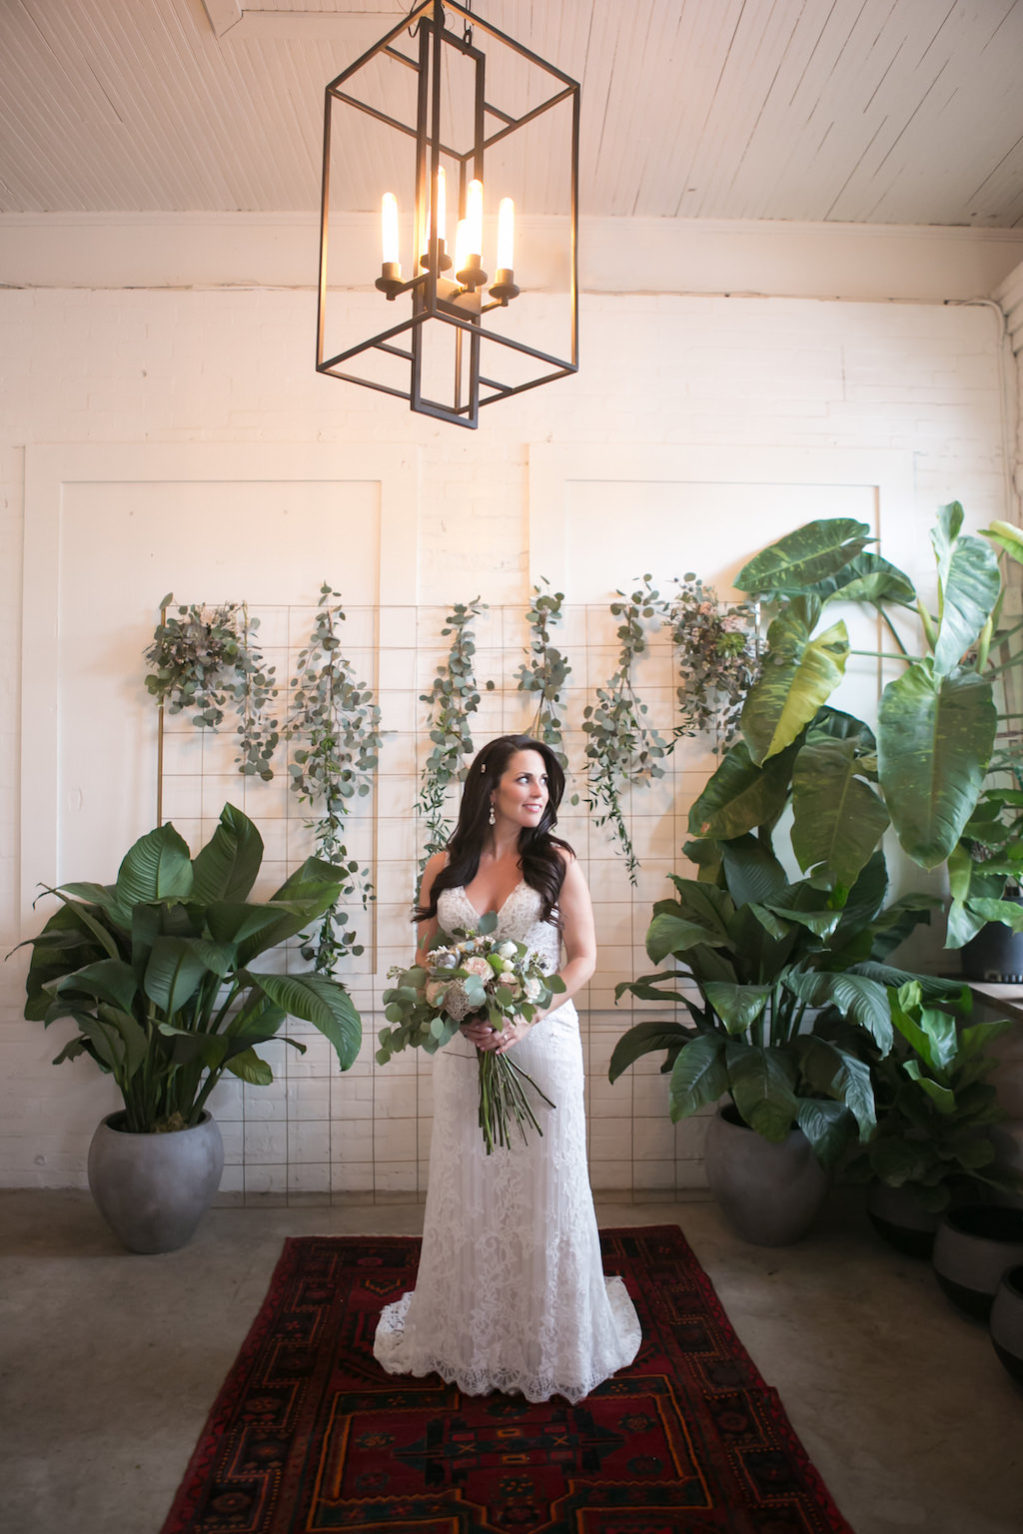 Indoor Bride Wedding Portrait, V-Neck Lace Floor Length Wedding Dress, Curled Hair Down with Jeweled Hair Clip with Pink and Ivory Floral and Greenery Bouquet | Tampa Bay Wedding Photographer Carrie Wildes Photography | Tampa Heights Wedding Venue Fancy Free Nursery